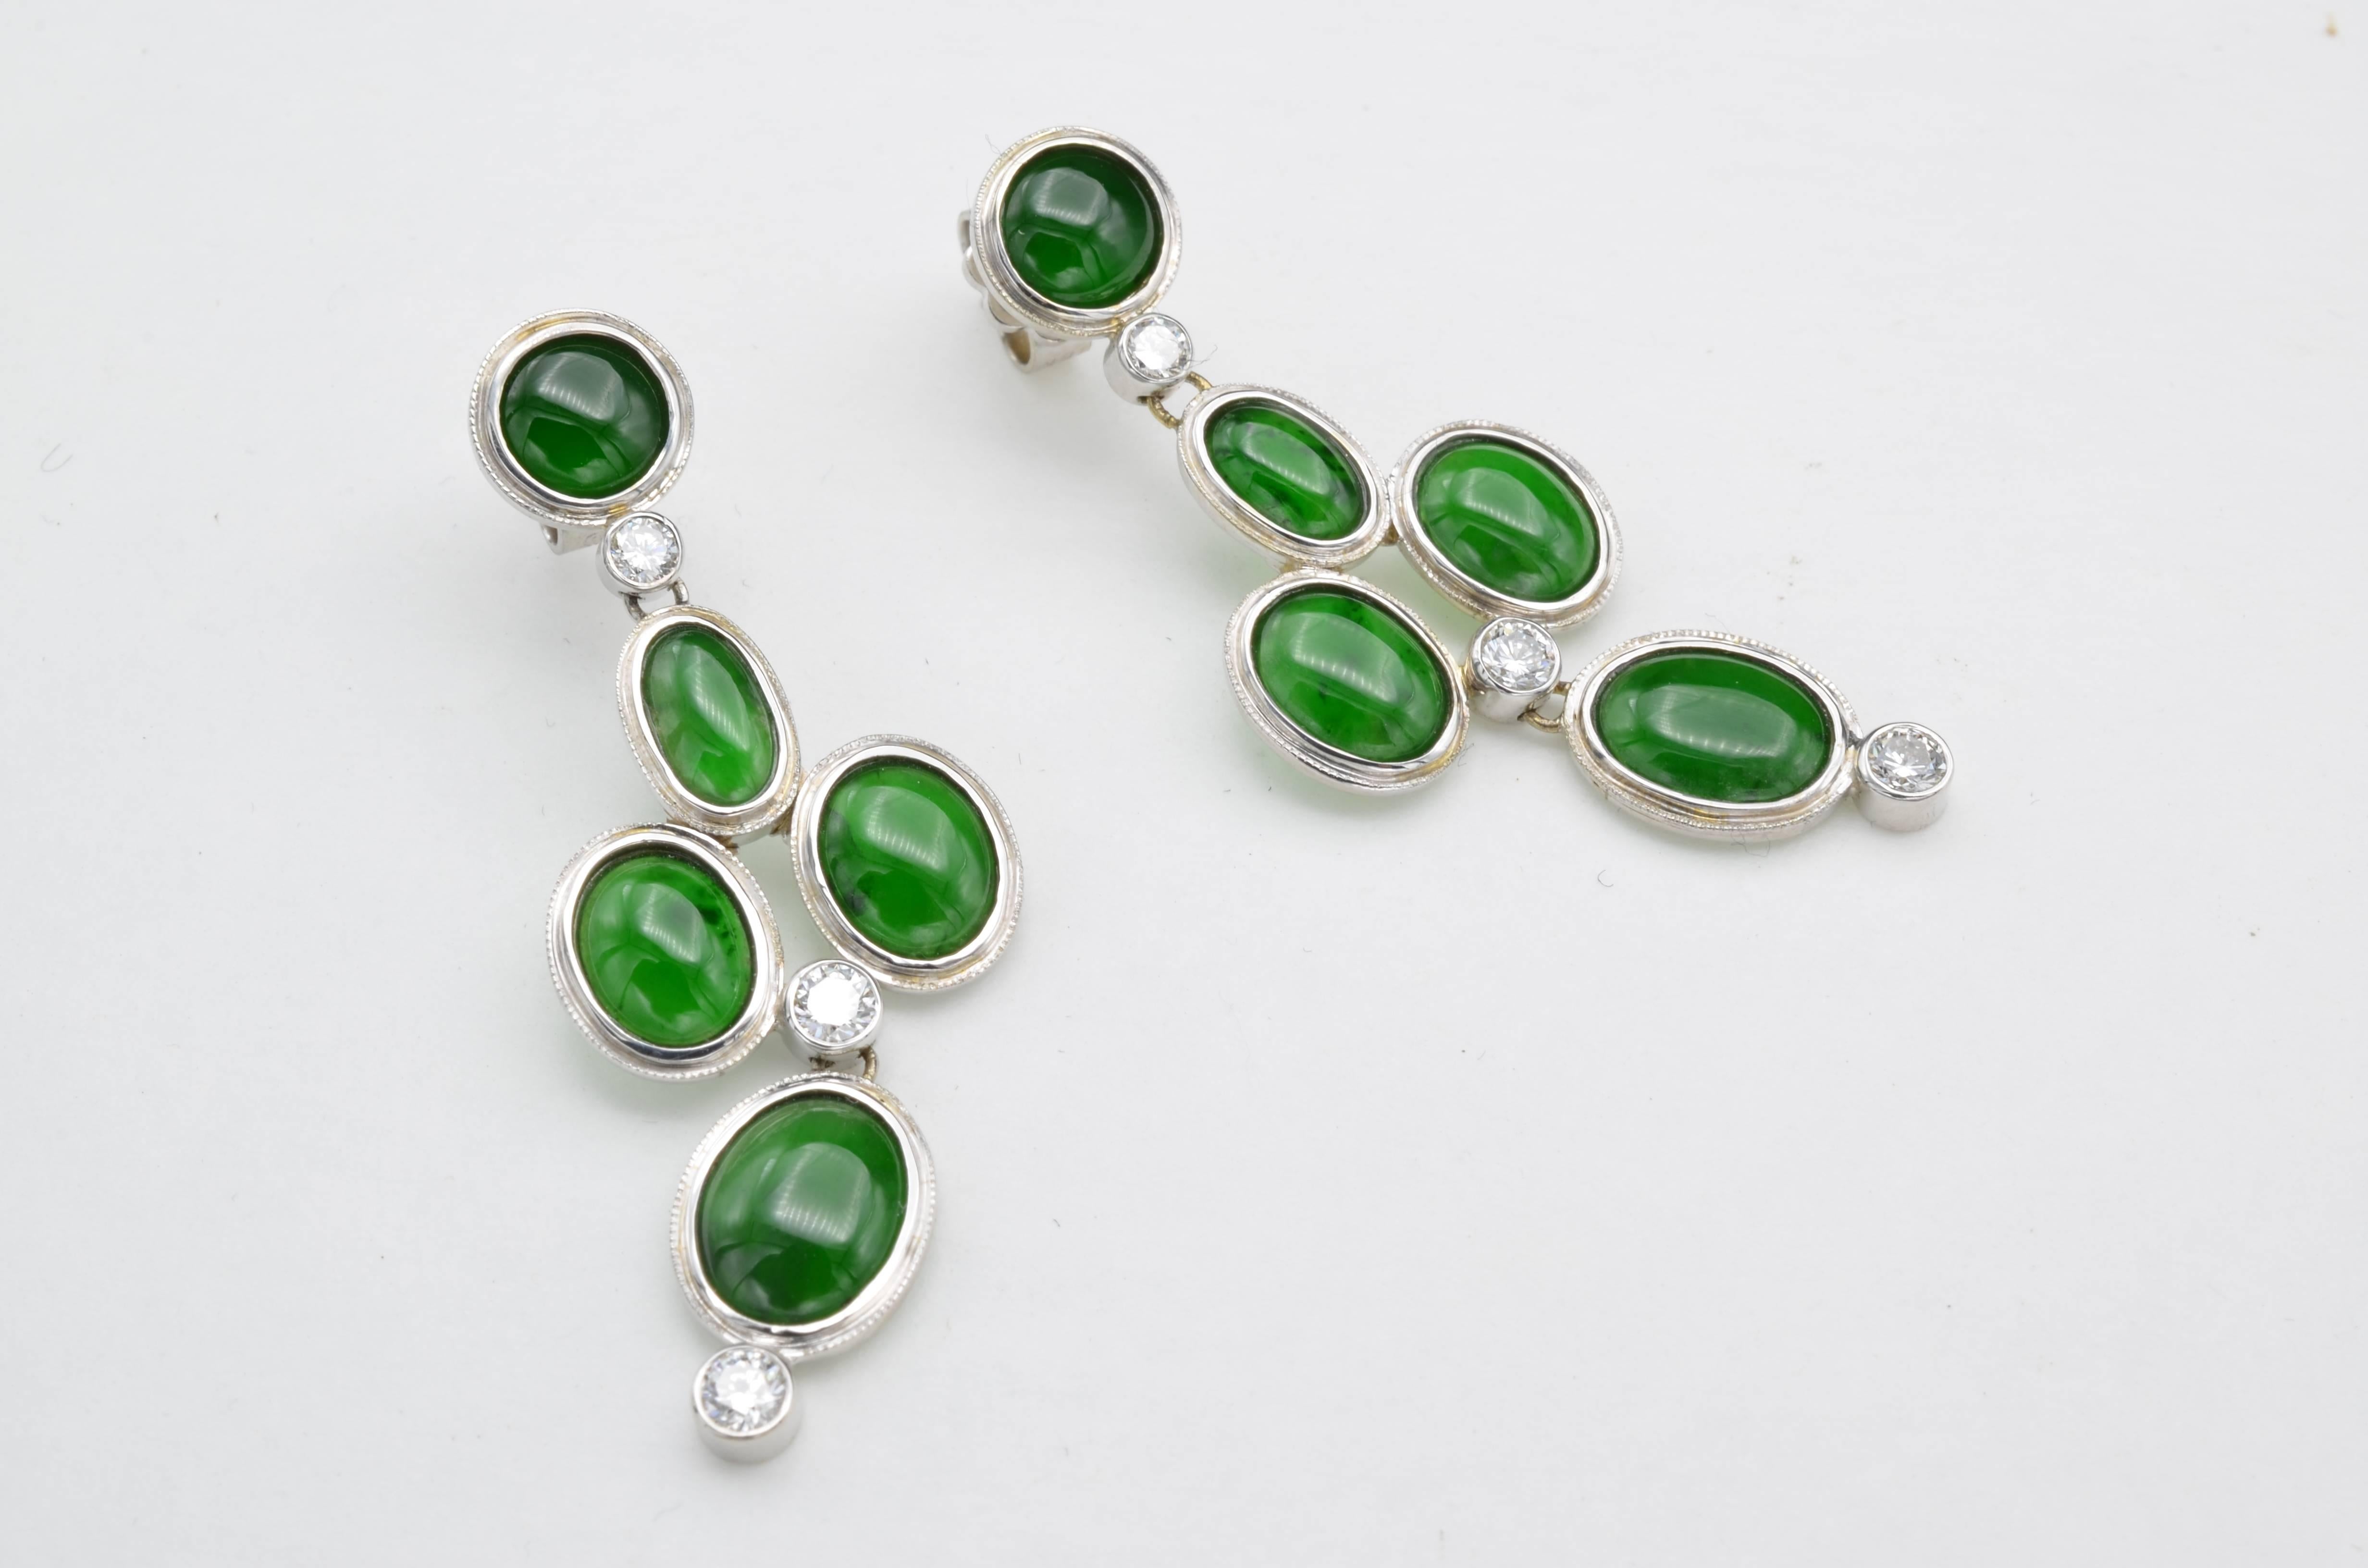 Modern Oval Green Jadeite Earrings with Round Diamonds in White Gold